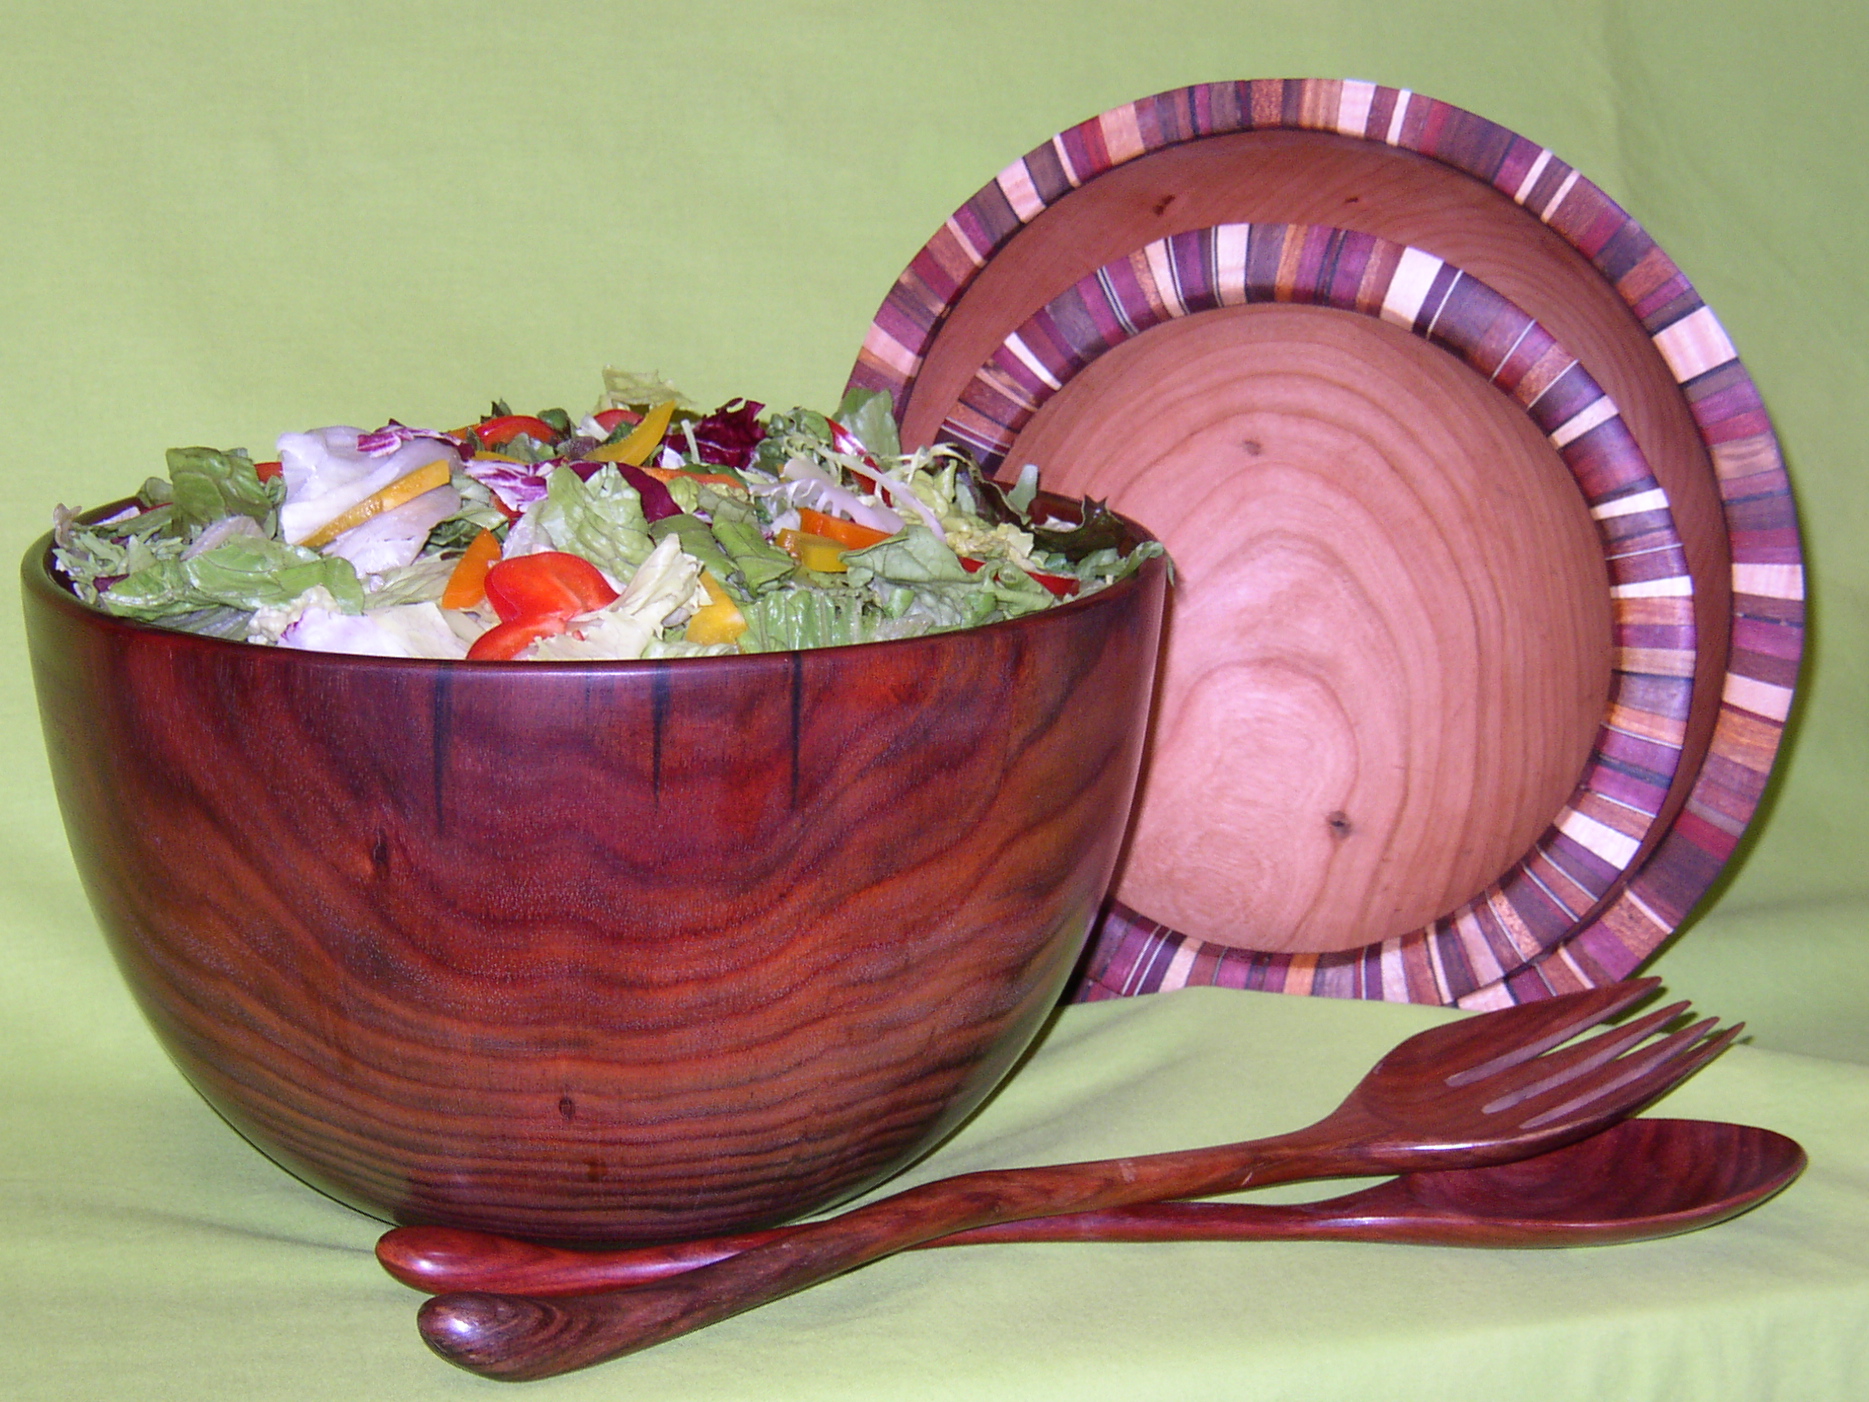 Rosewood and uniquely hand crafted salad bowls and servers.